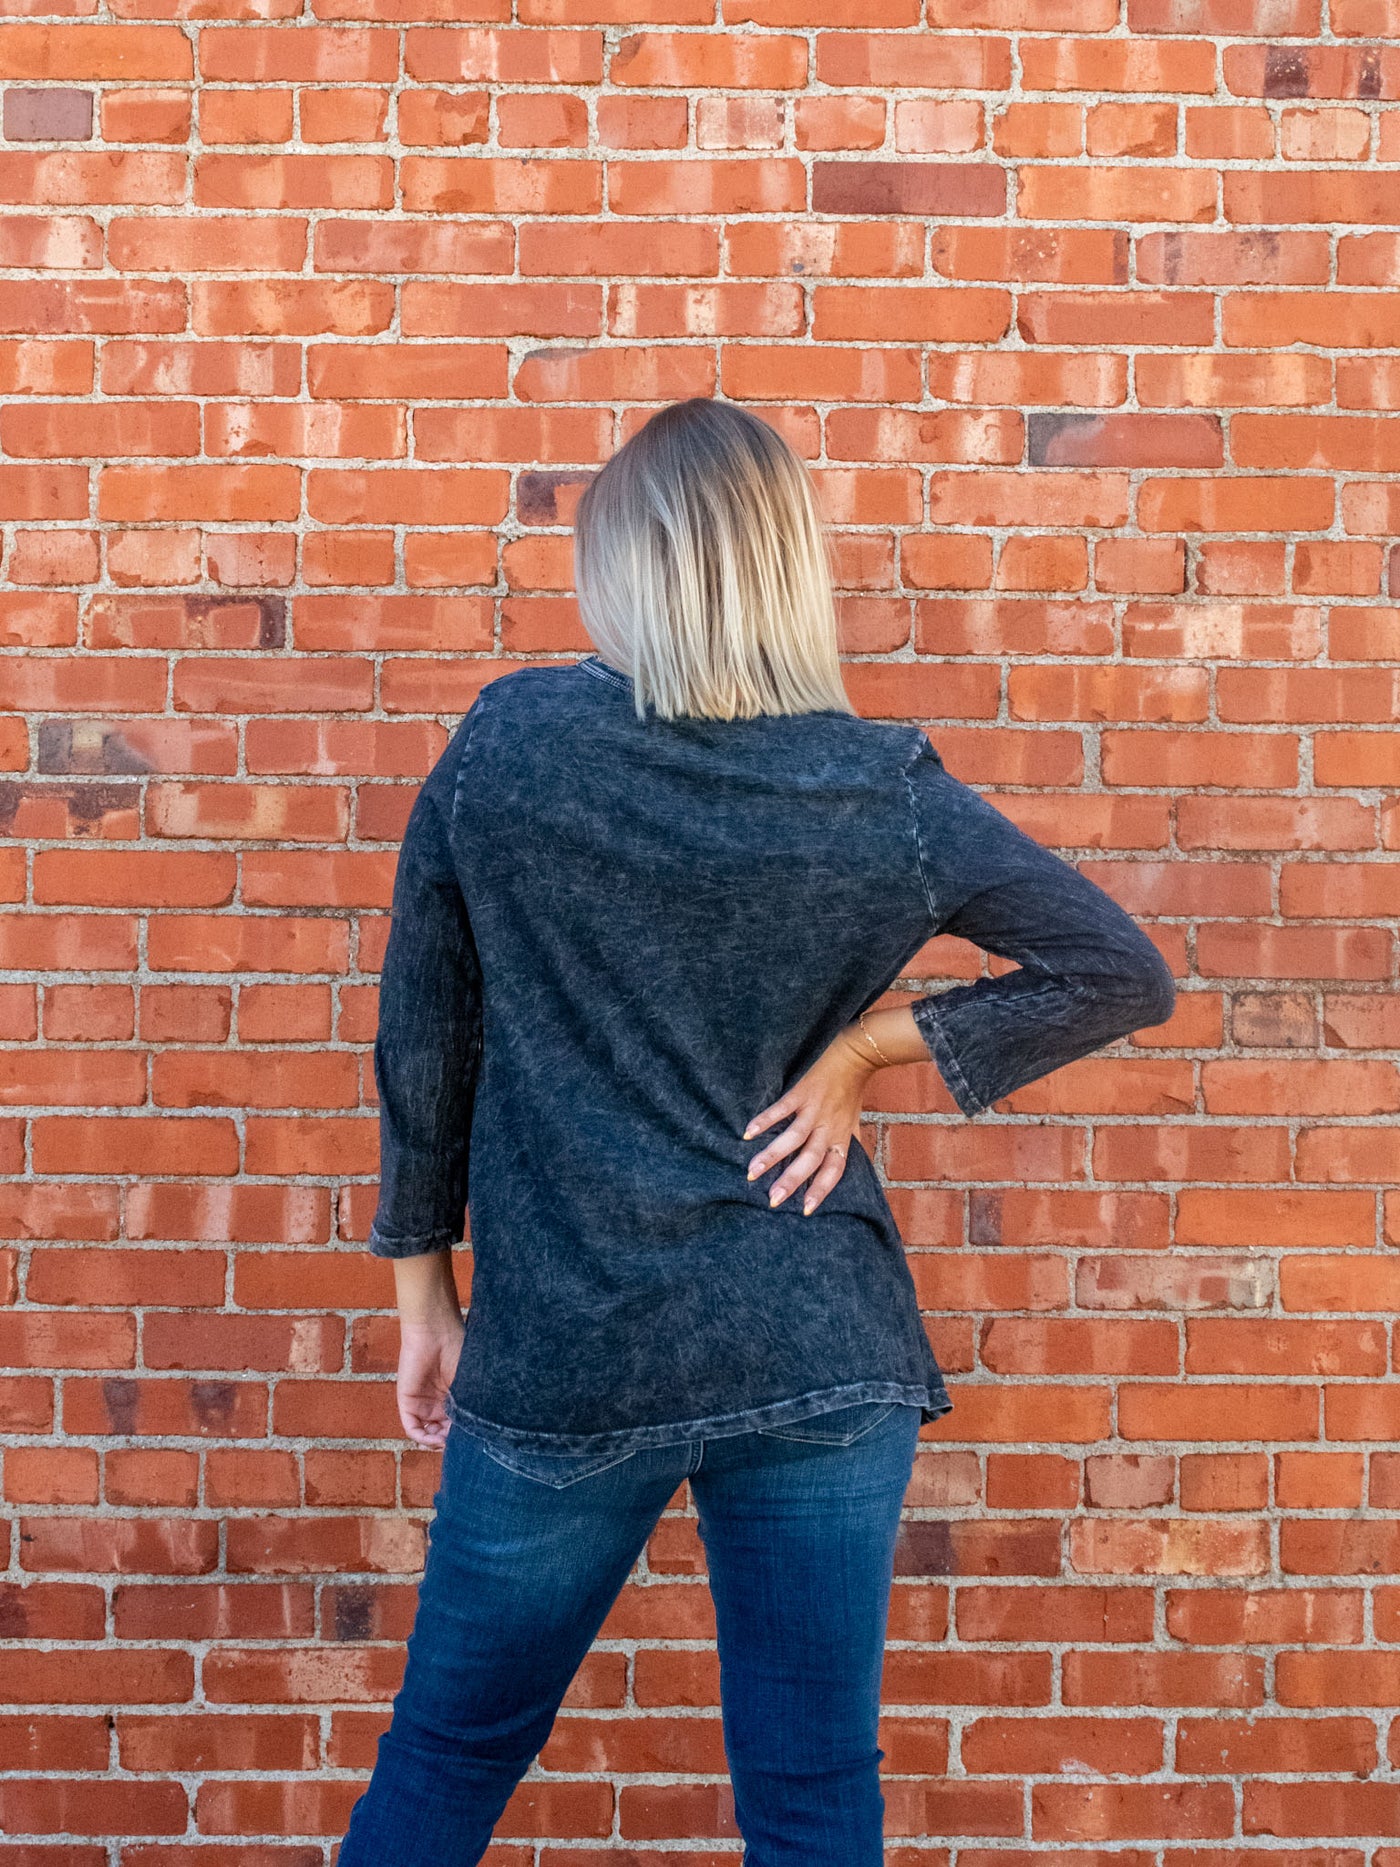 A model wearing a gray, mineral washed, 3/4 sleeve length top with a sunflower graphic. The model has it paired with a pair of medium washed skinny jeans.